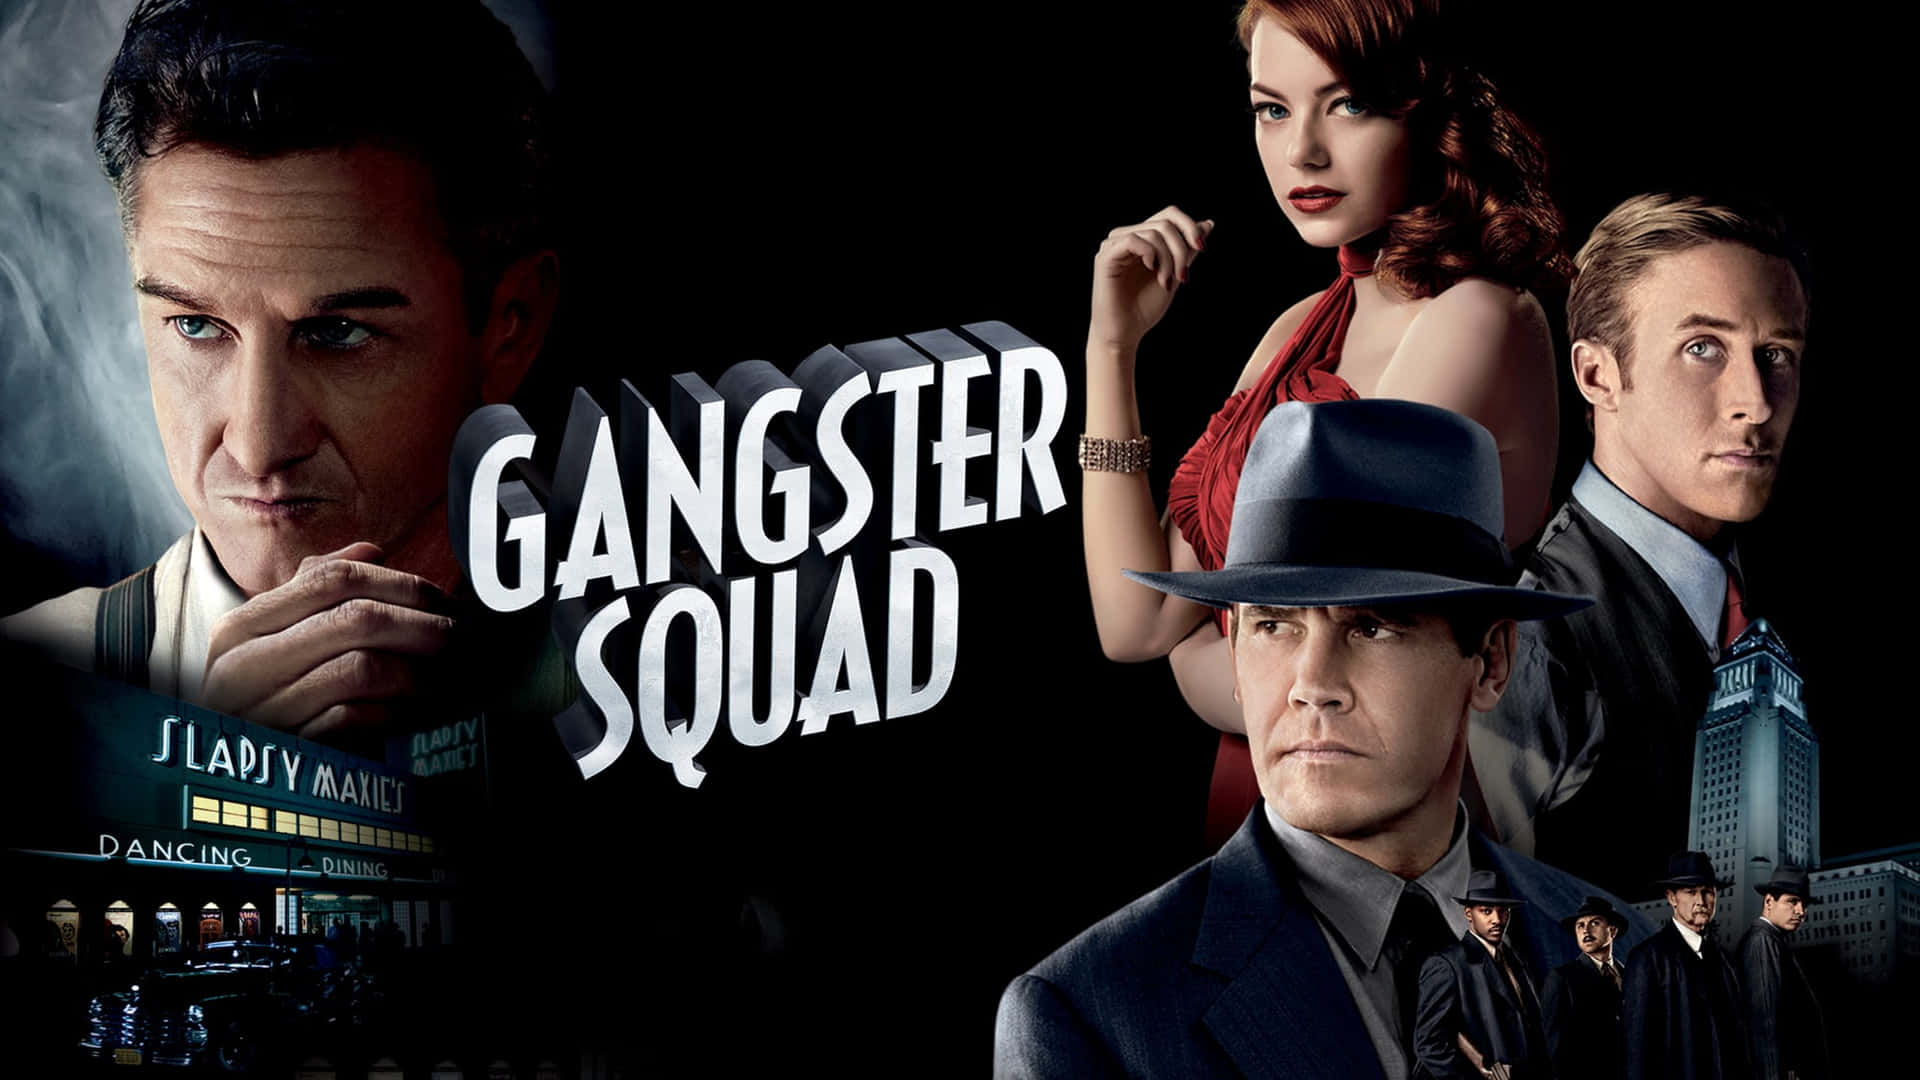 'The Rise of the Gangster'